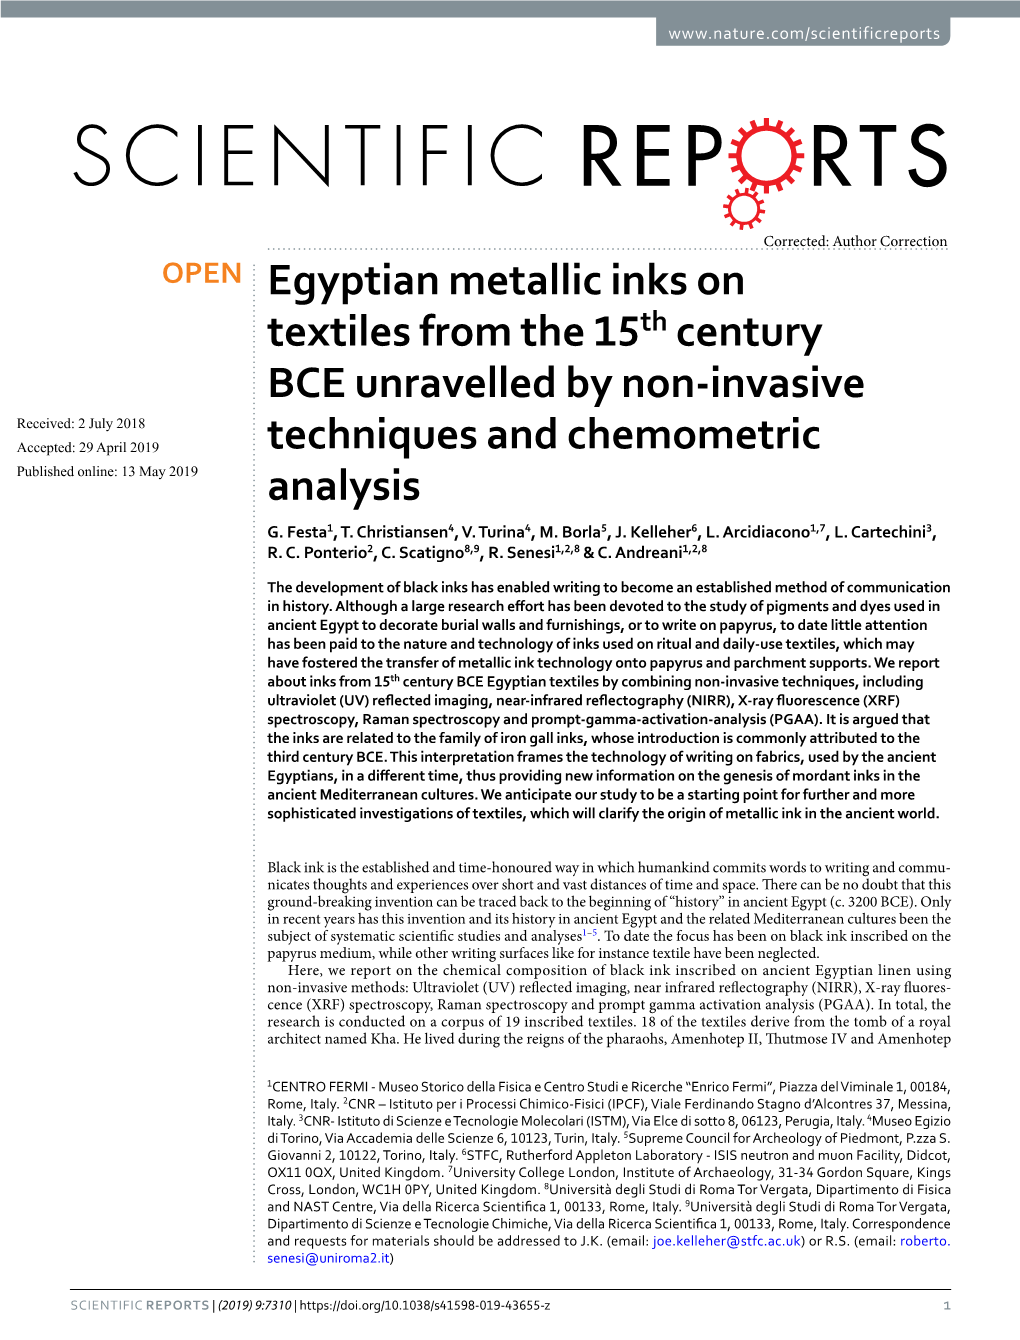 Egyptian Metallic Inks on Textiles from the 15Th Century Bce Unravelled by Non-Invasive Techniques and Chemometric Analysis